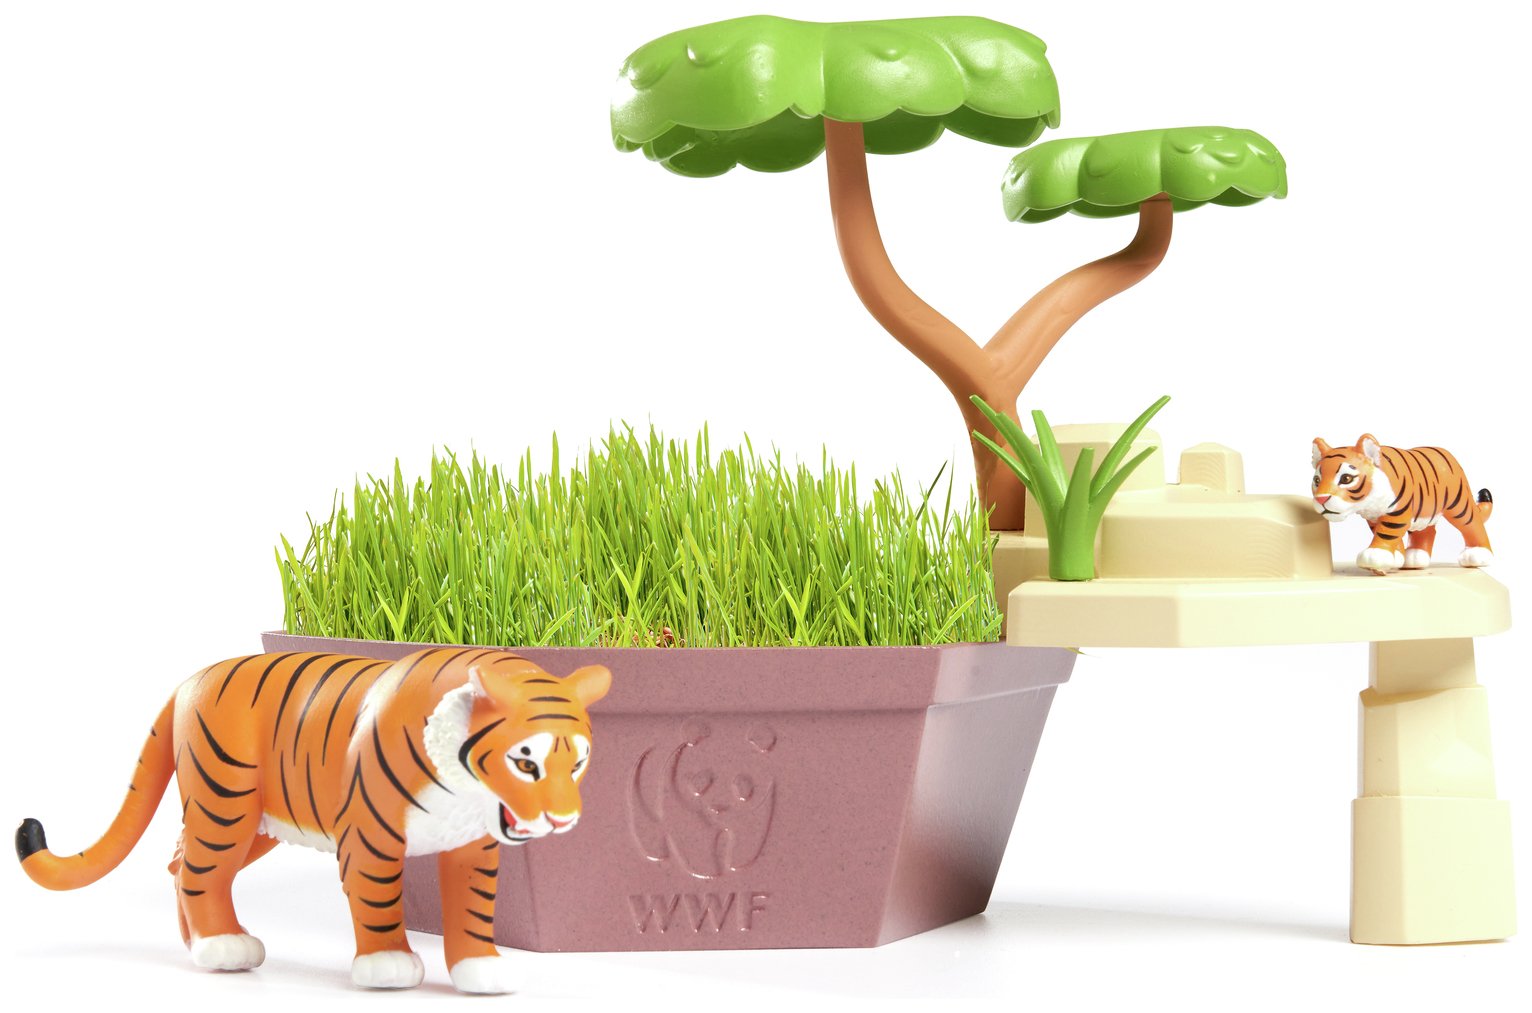 WWF Tigers Hideout Playset